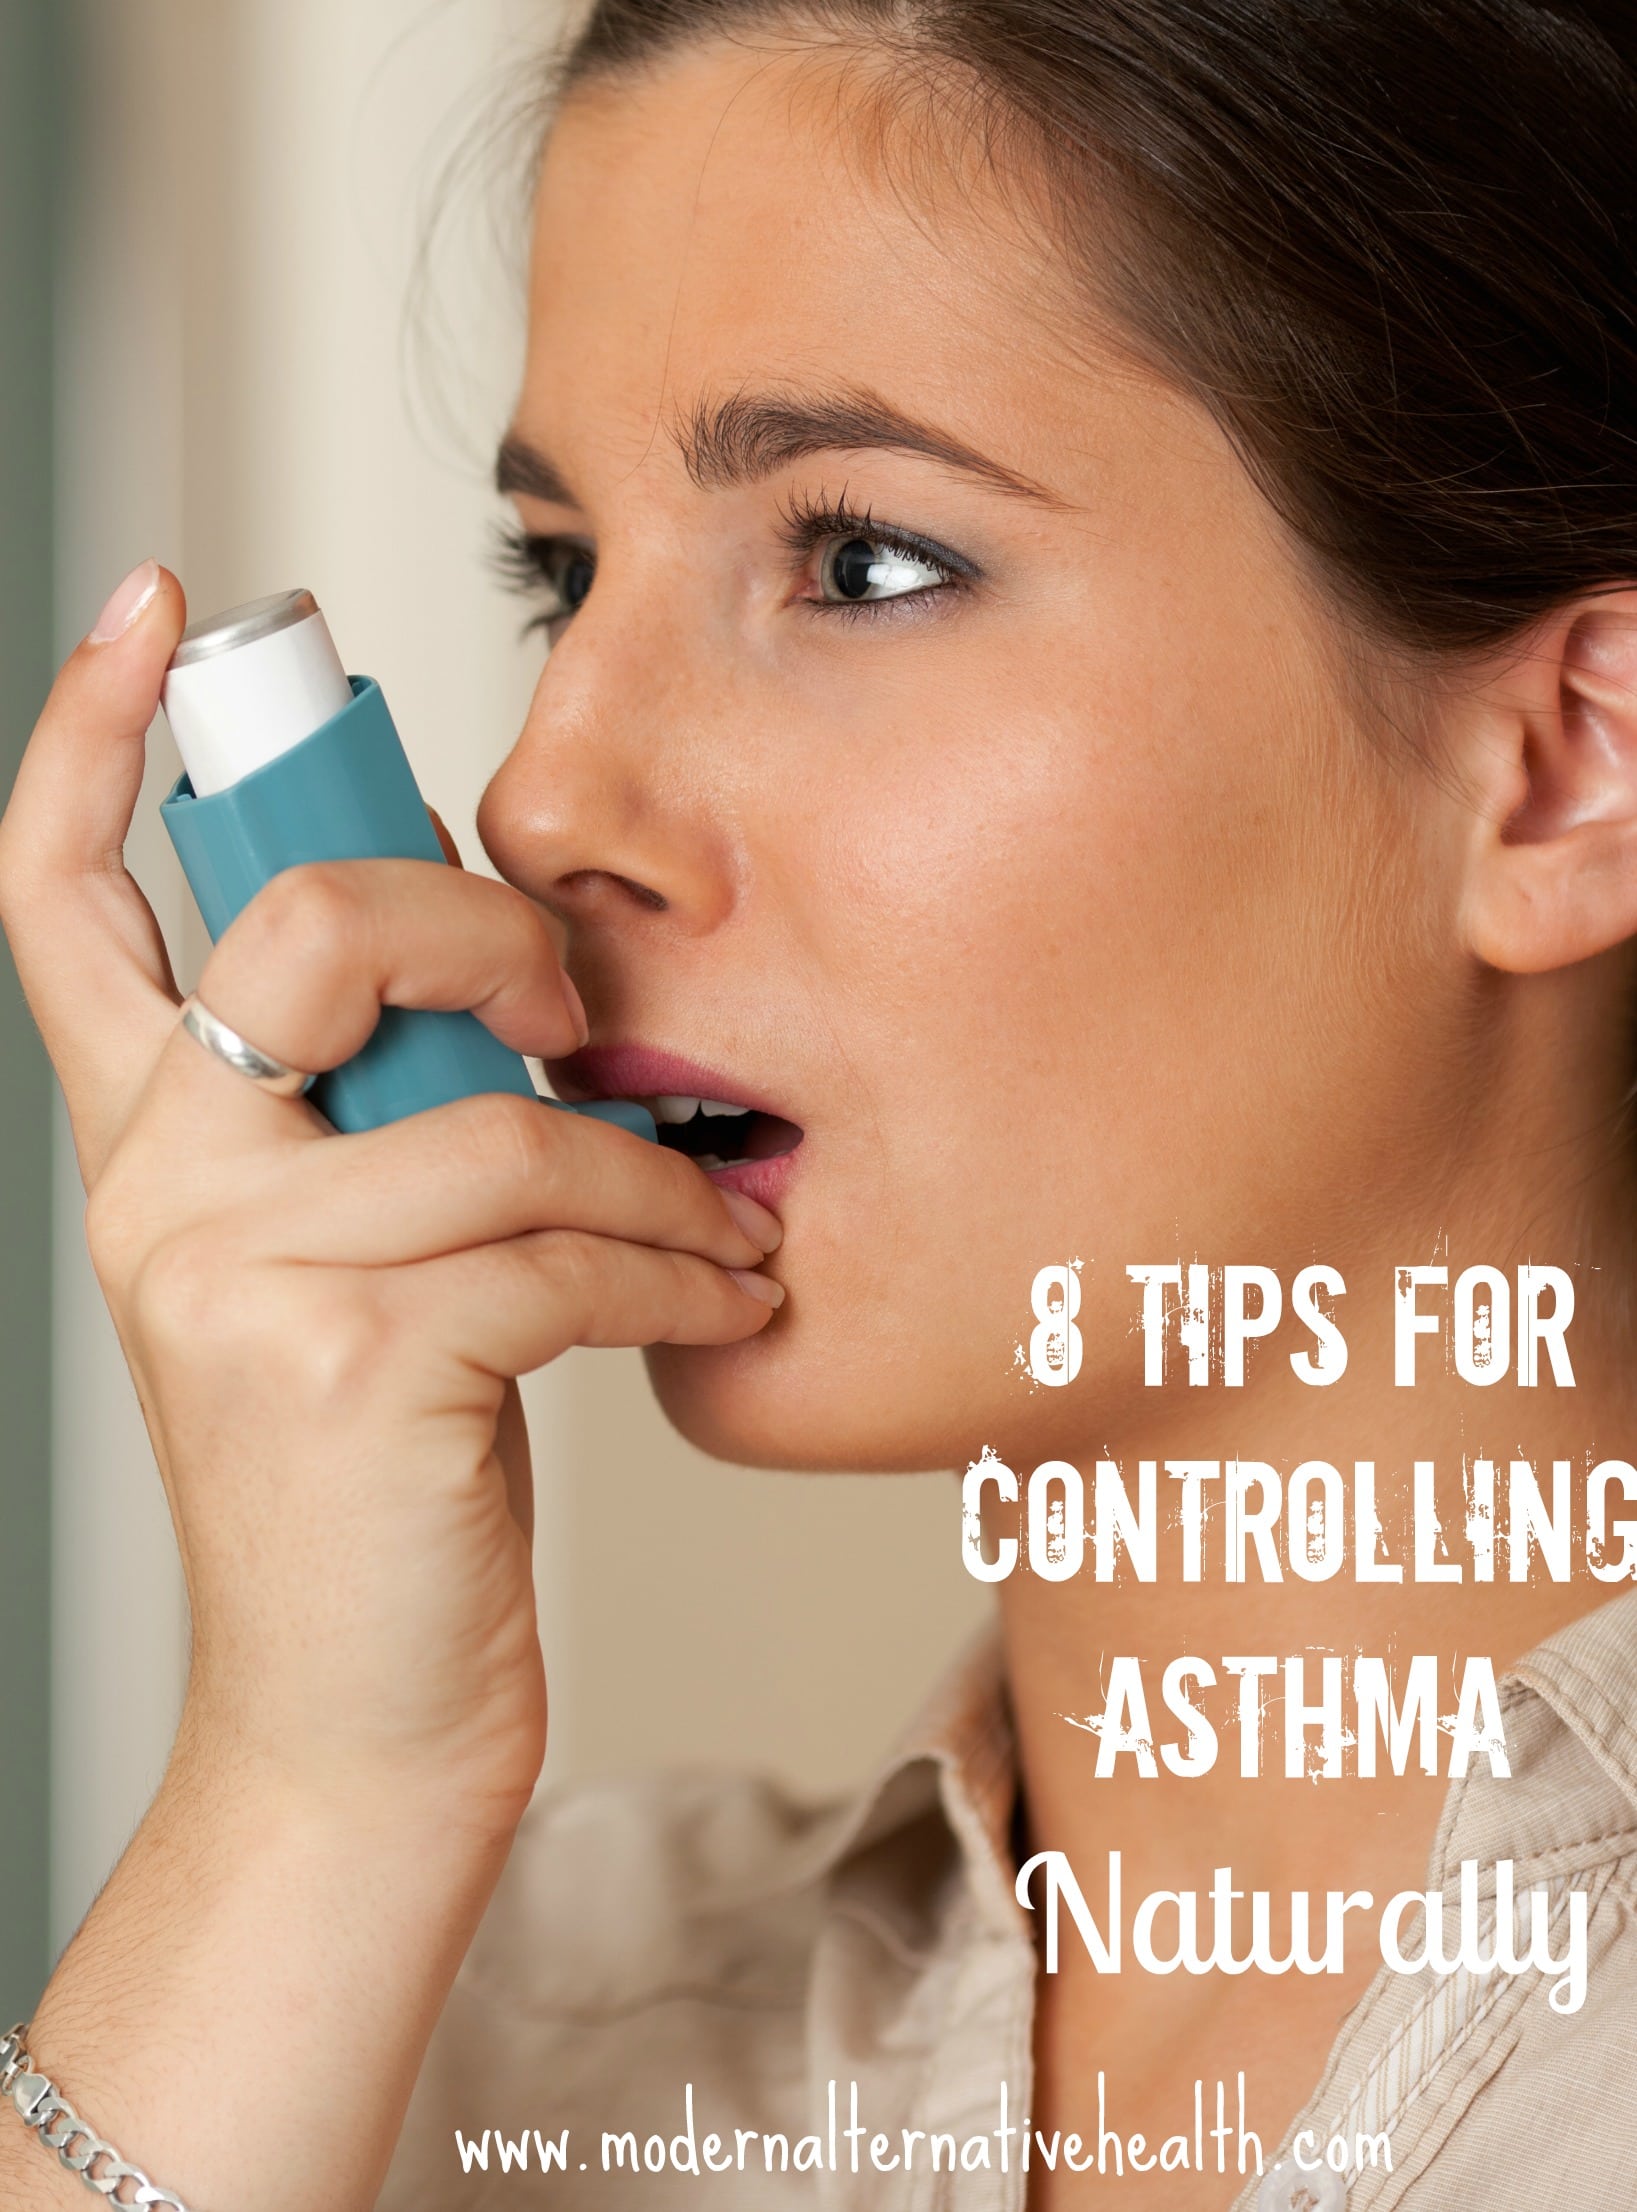 Young woman using asthma inhaler.